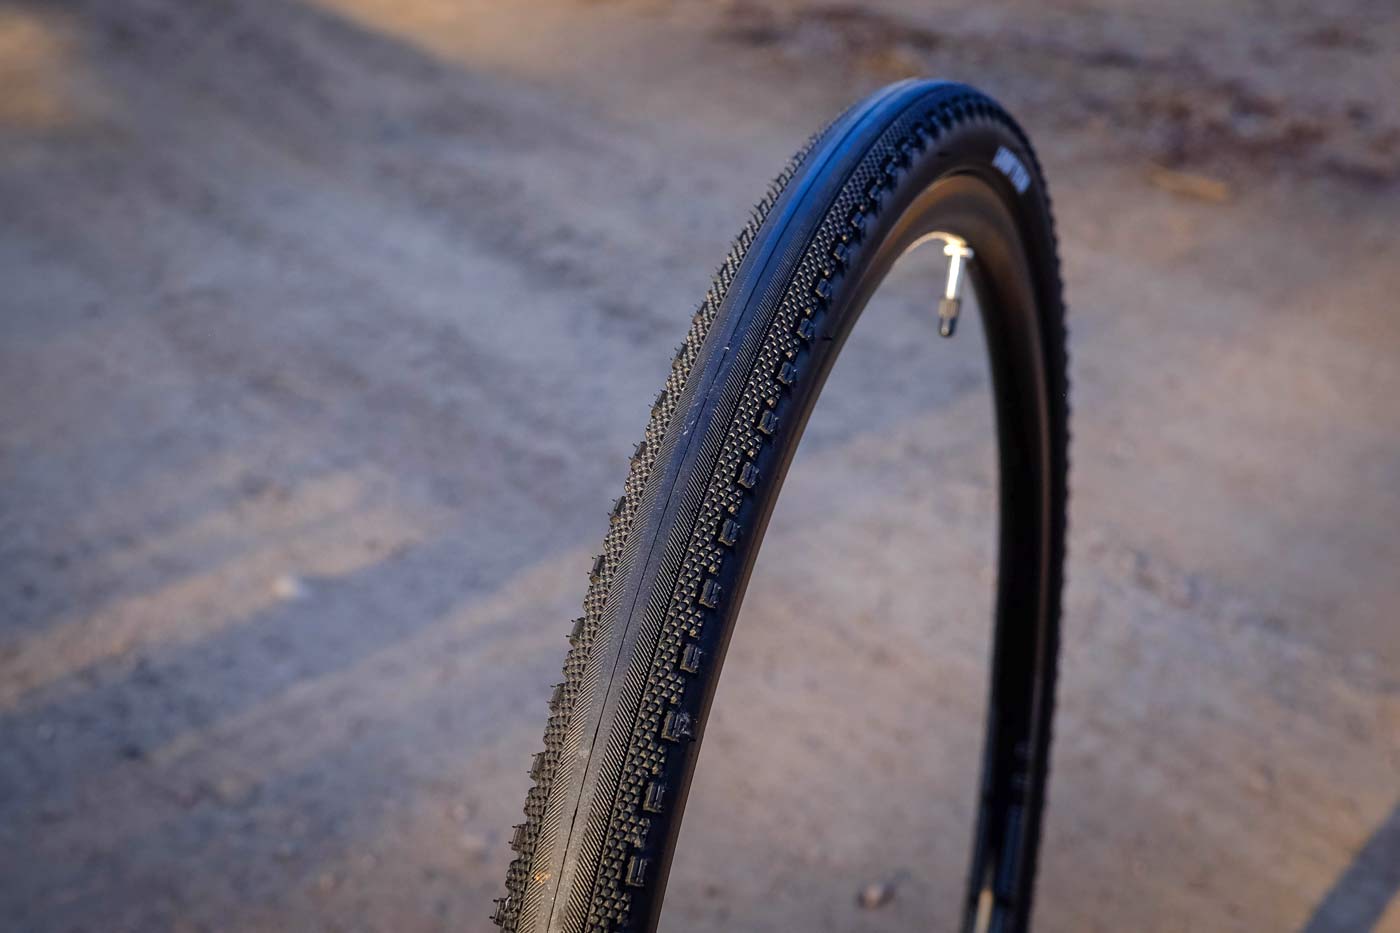 2018 Goodyear County Gravel Bike Tires are tubeless ready